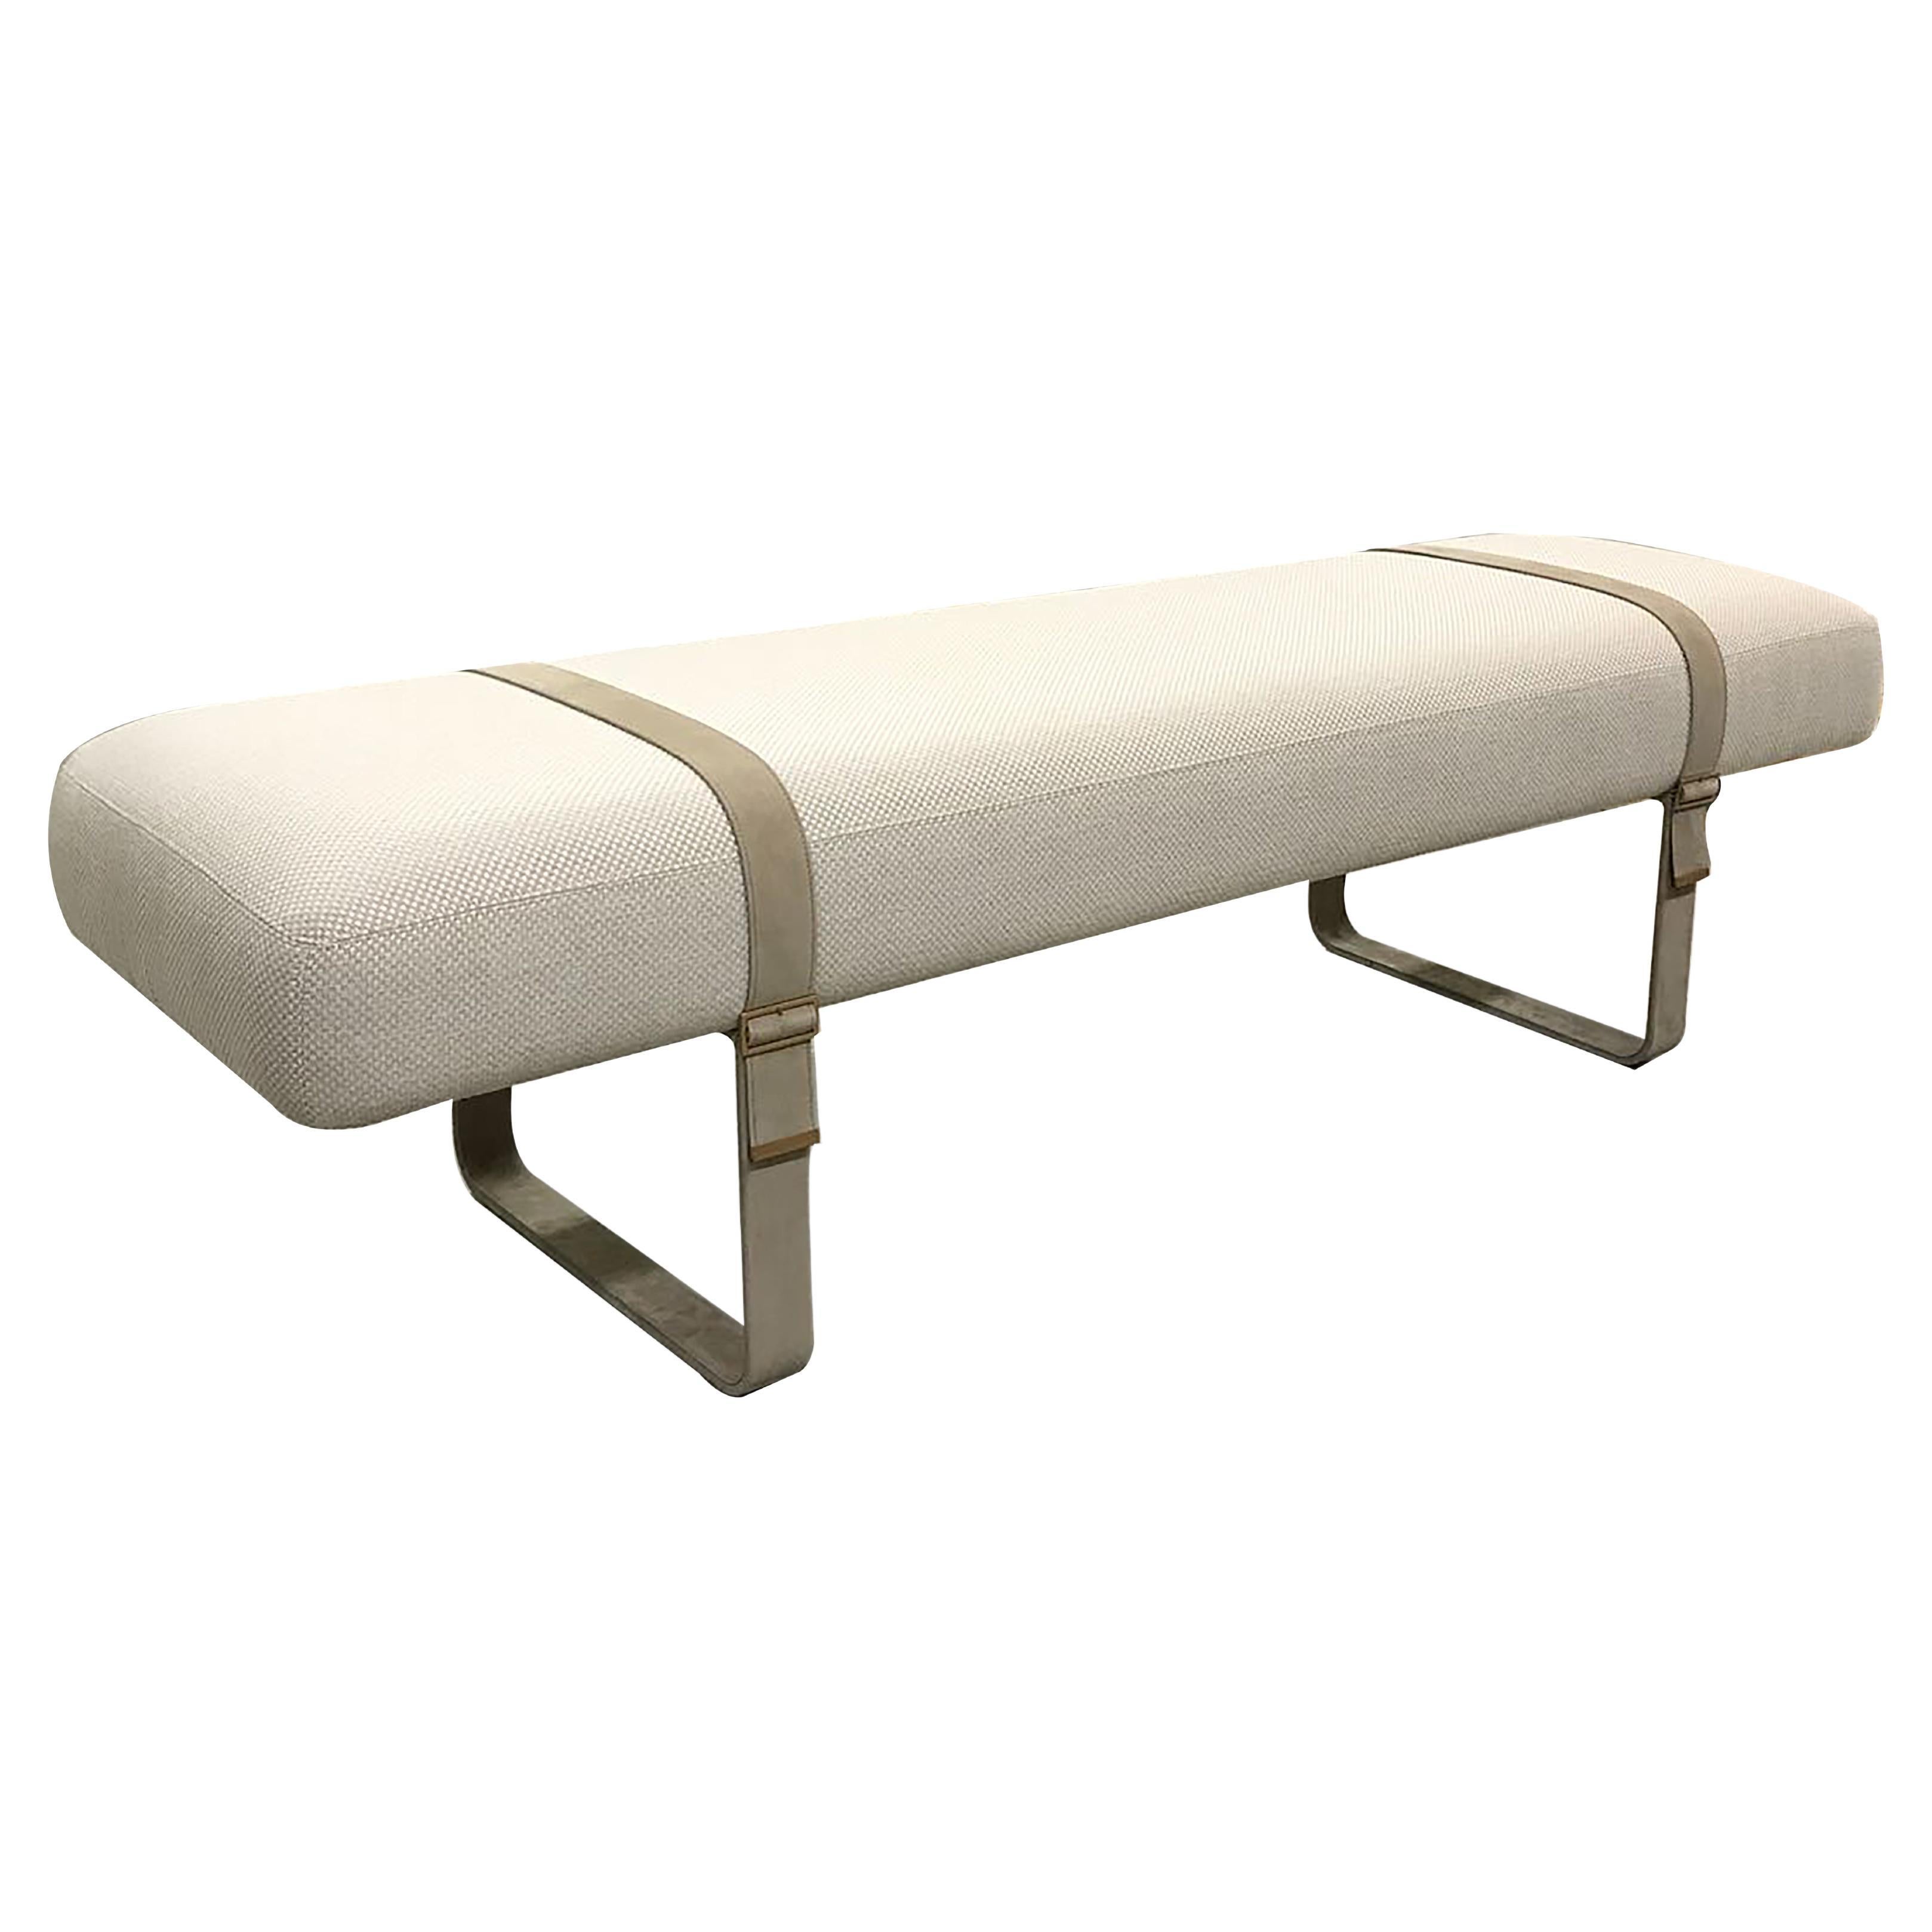 Contemporary Bench With Leather Belts Cream and Nude For Sale